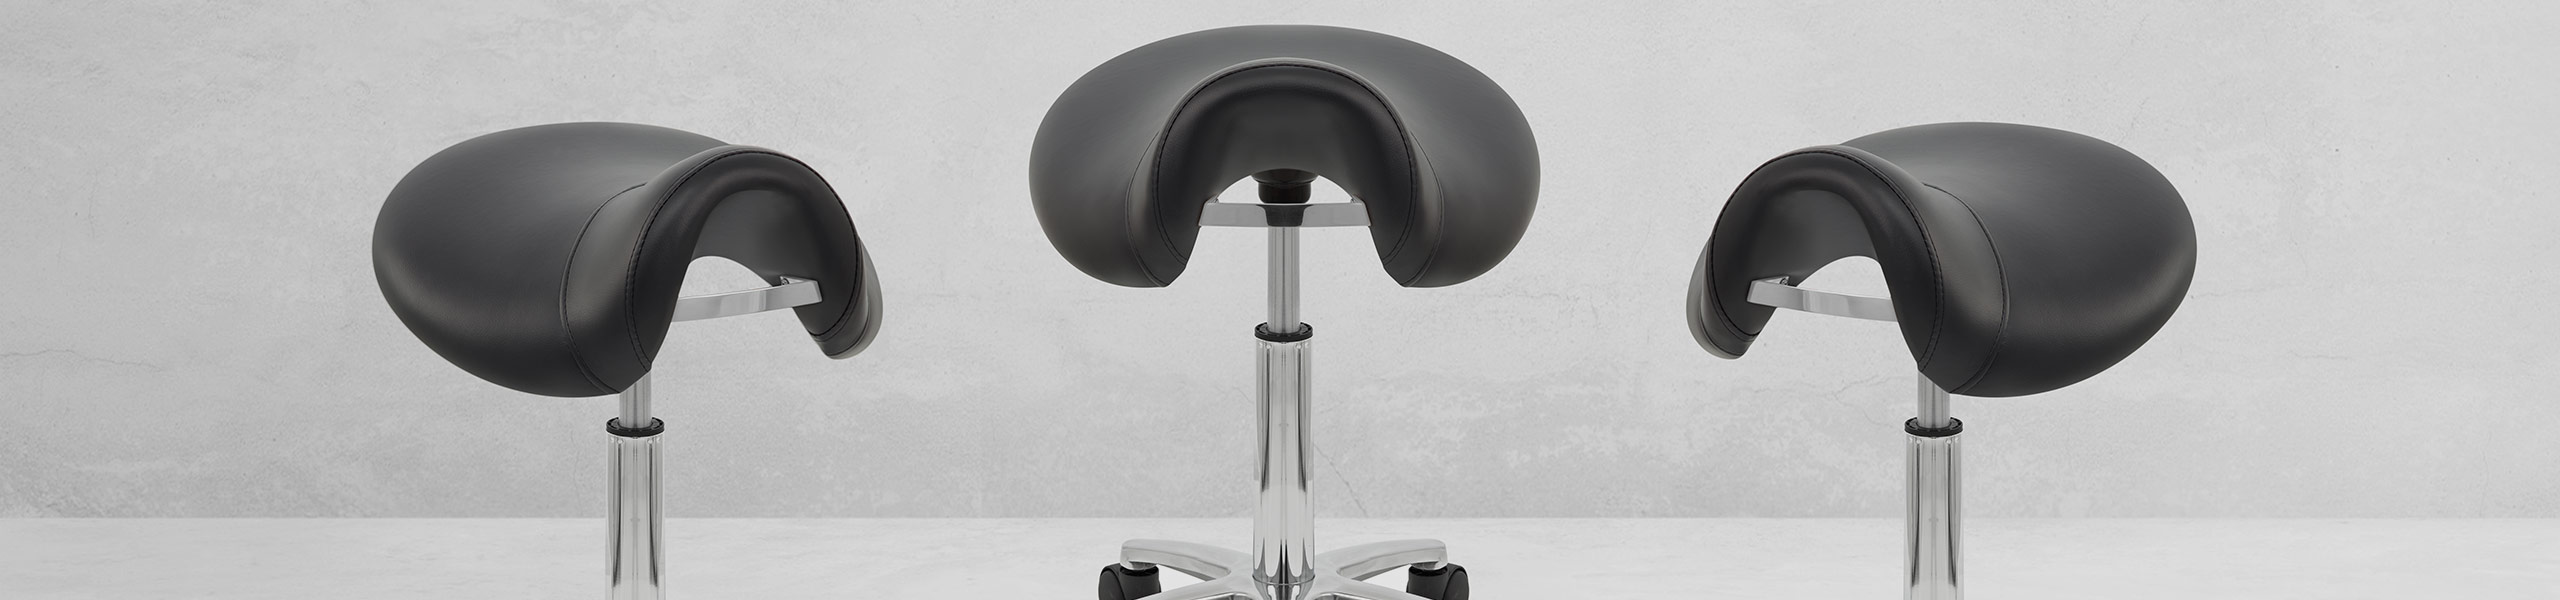 Deluxe Saddle Stool Black Video Banner